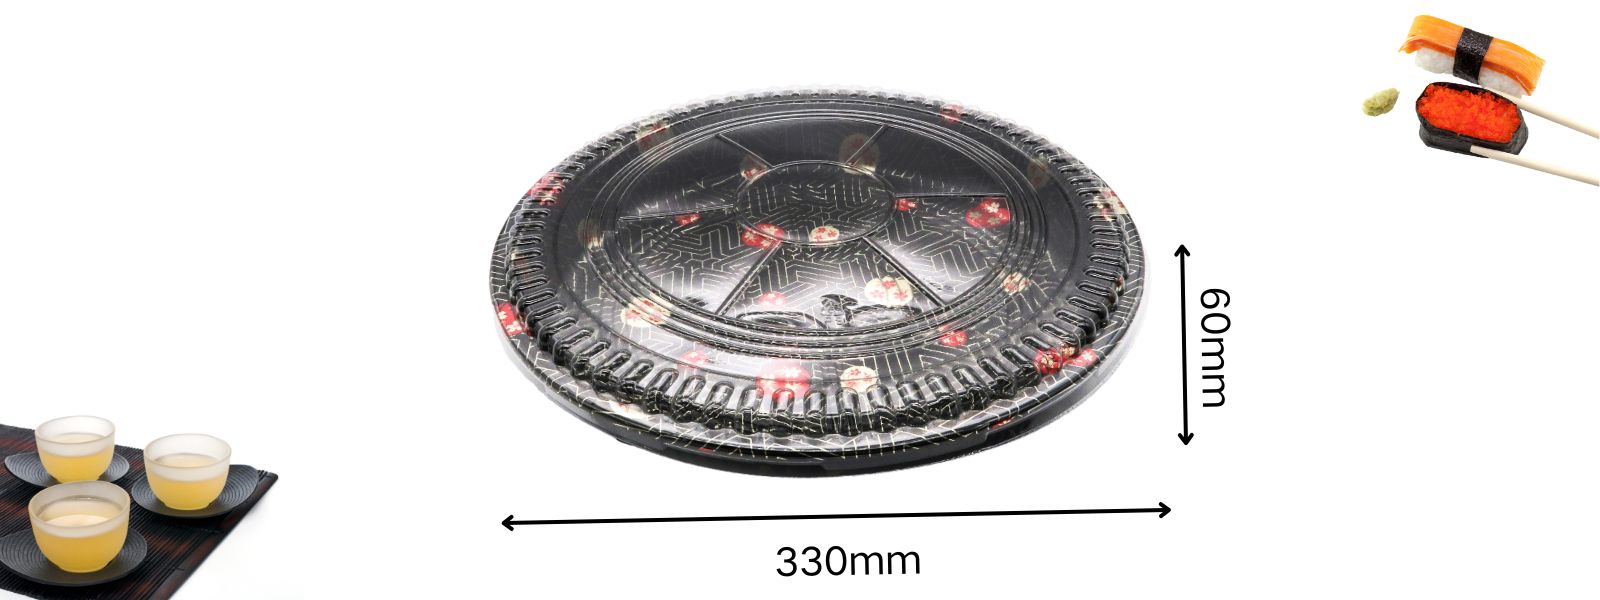 size of round sushi party tray：￠330*60